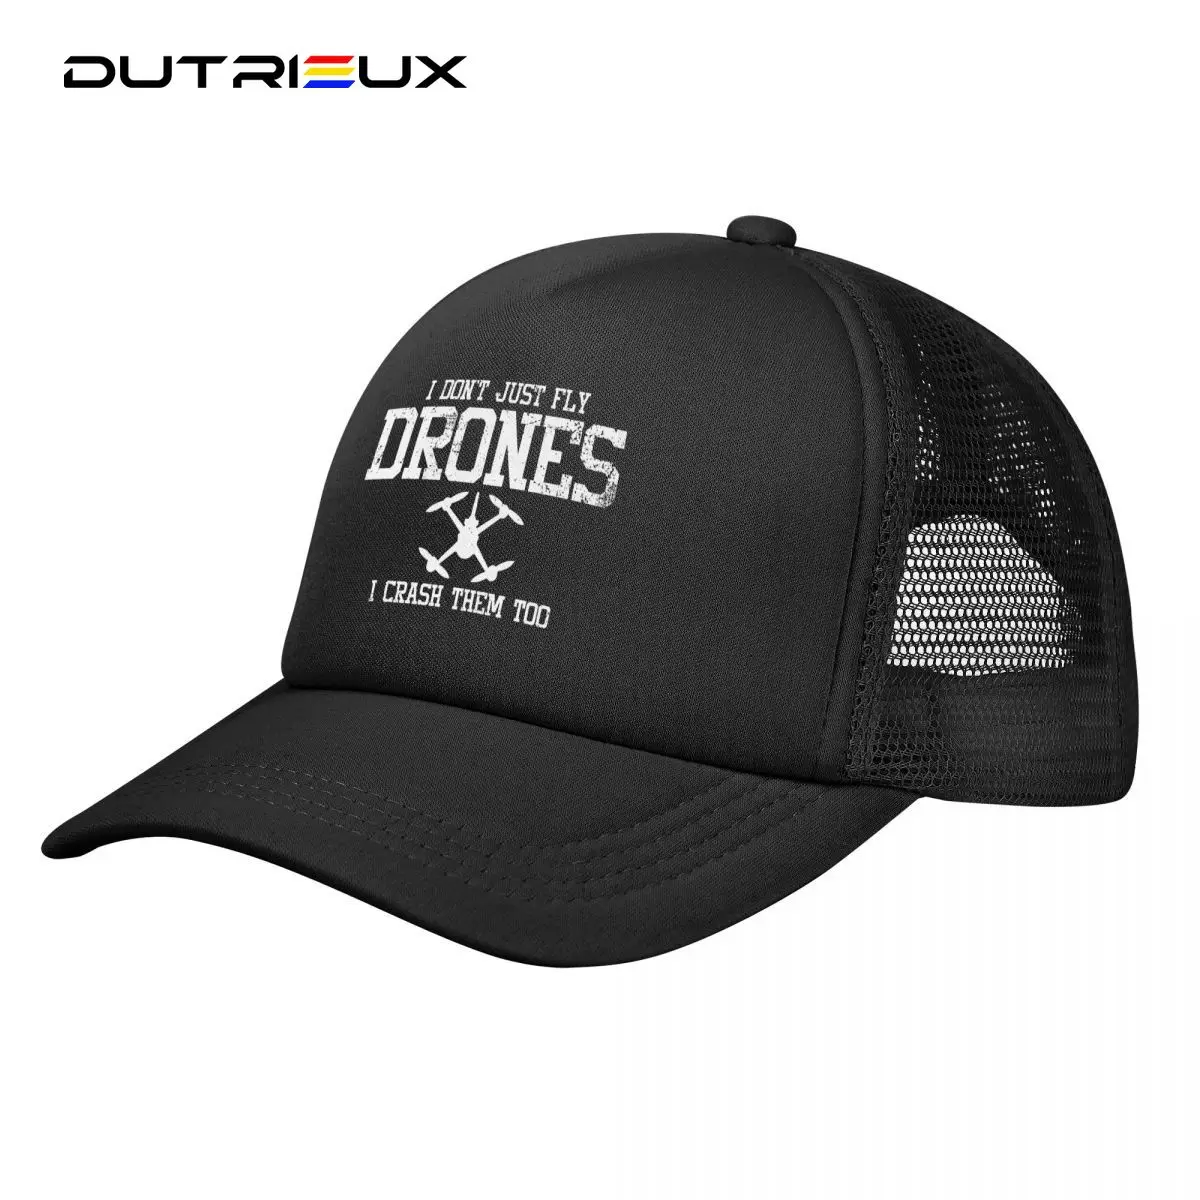 

I Don't Just Fly Drones I Crash Them Too Mesh Baseball Hat Sports Workout Tennis Hats for Men Women Adults Outdoor Sports caps